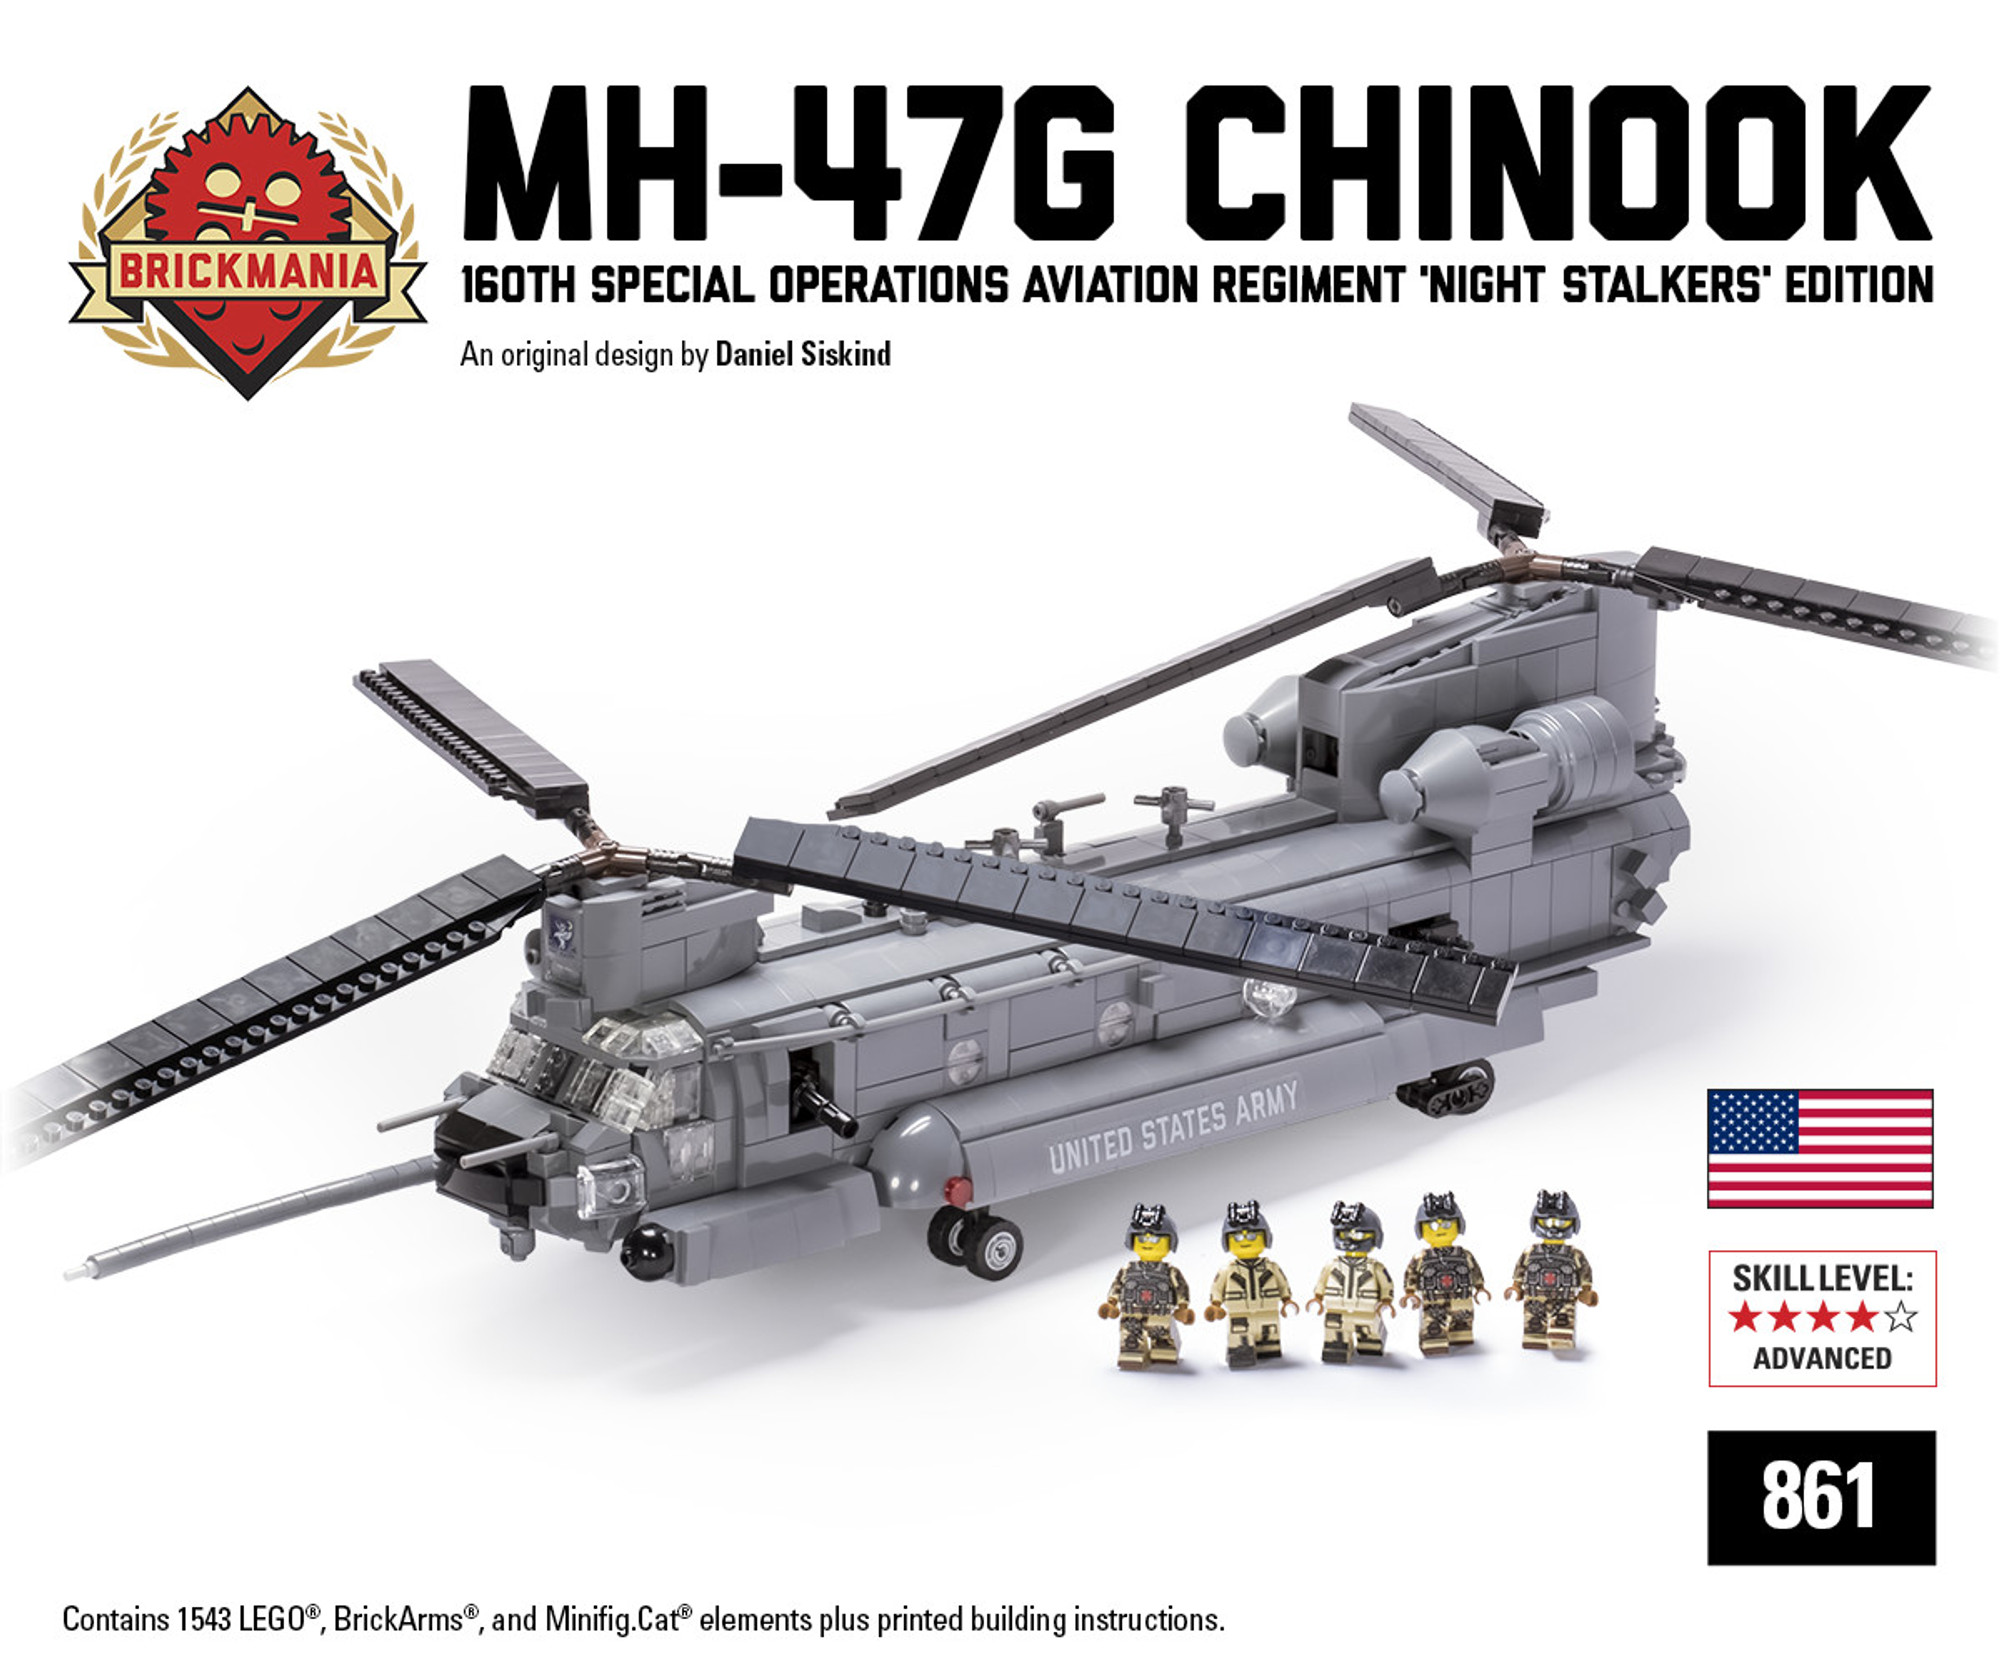 MH-47G Chinook - 160th Special Operations Aviation Regiment (SOAR) 'Night  Stalkers' Edition